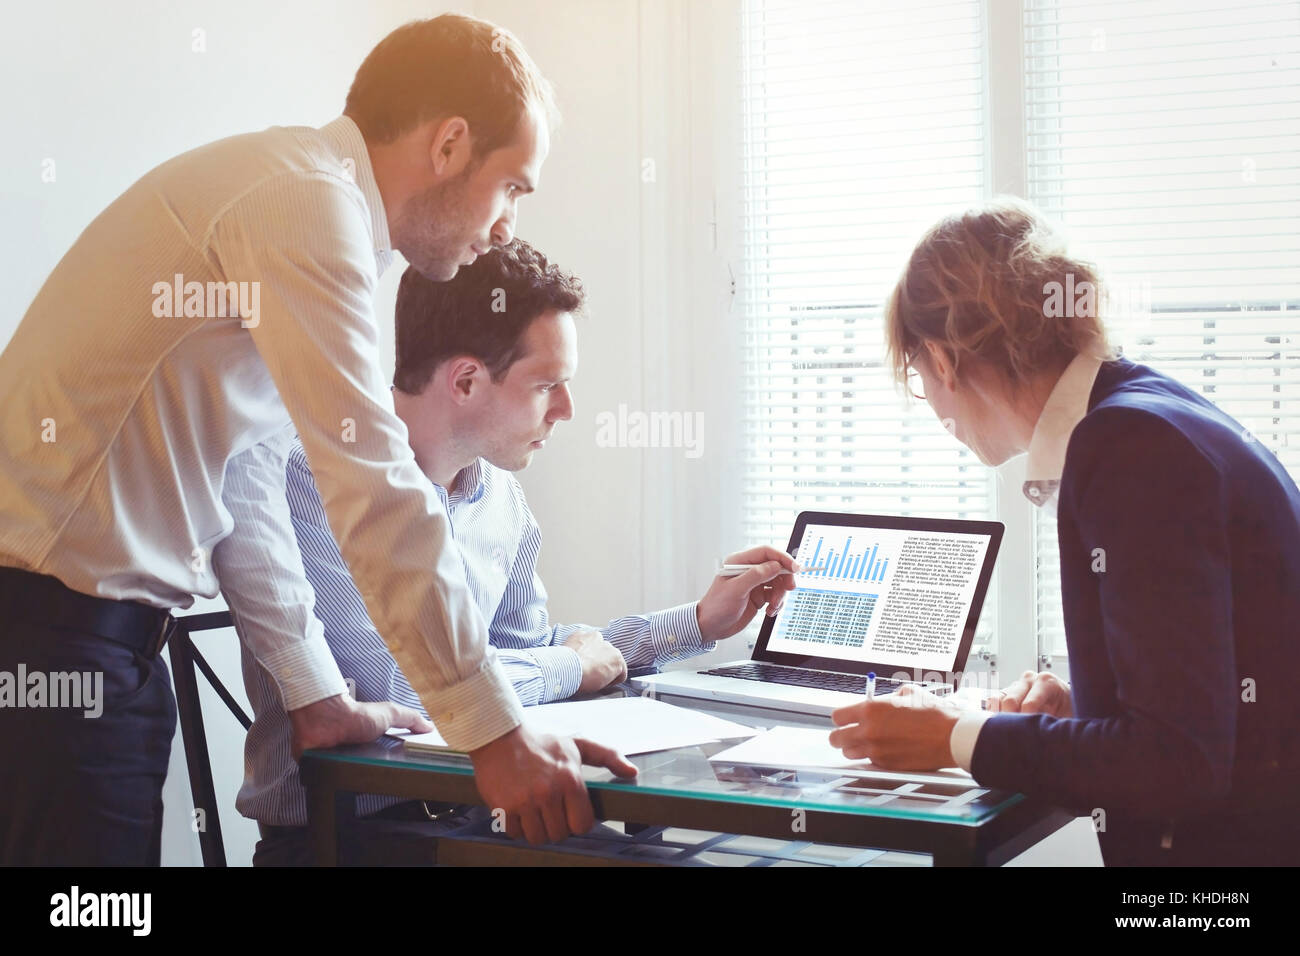 business people working on project together in the office, teamwork concept Stock Photo